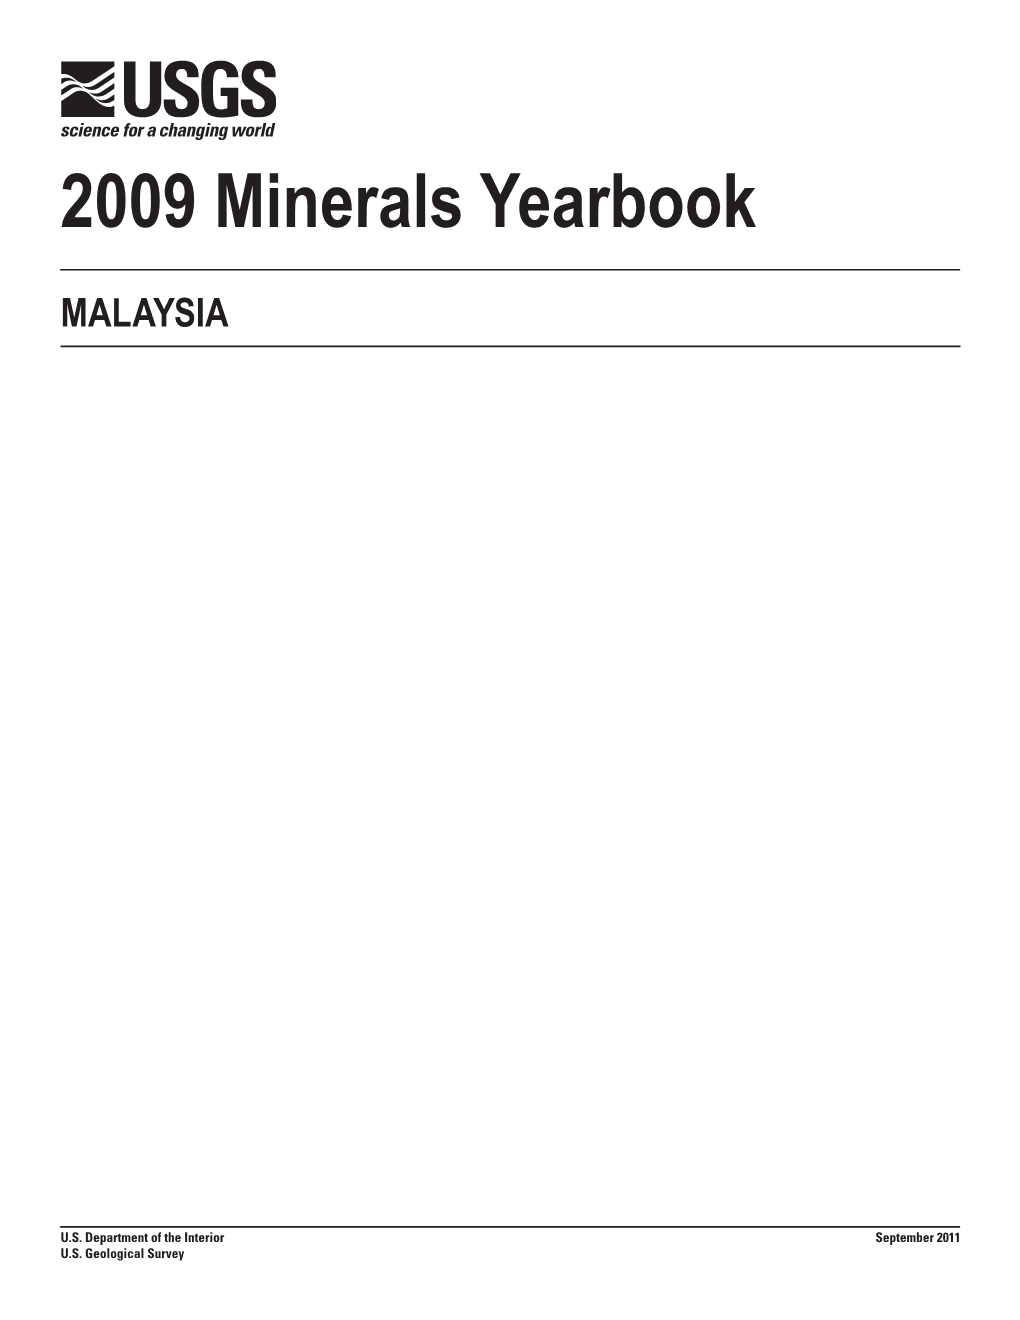 The Mineral Industry of Malaysia in 2009